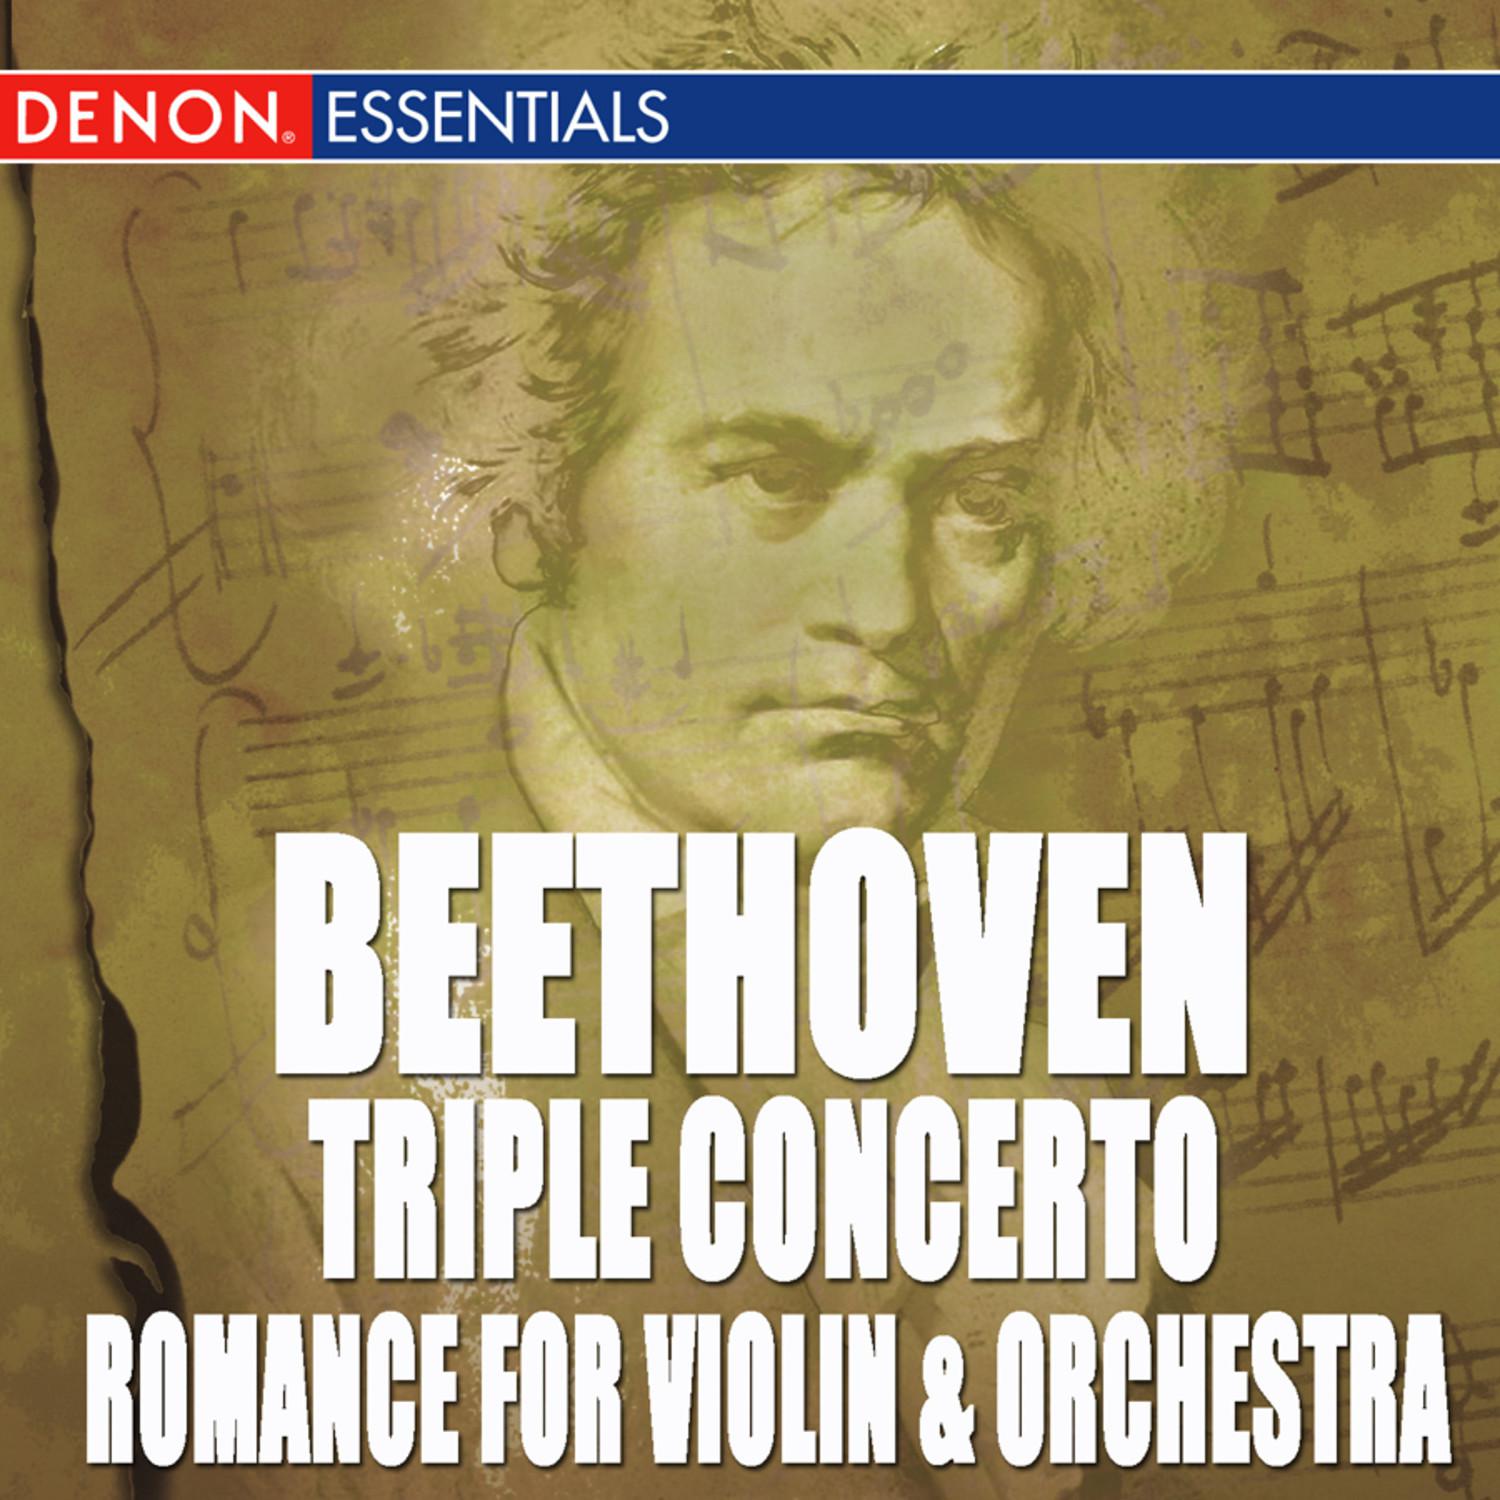 Concerto for Piano and Orchestra No. 2 in B-Flat Major, Op. 19: III. Rondo